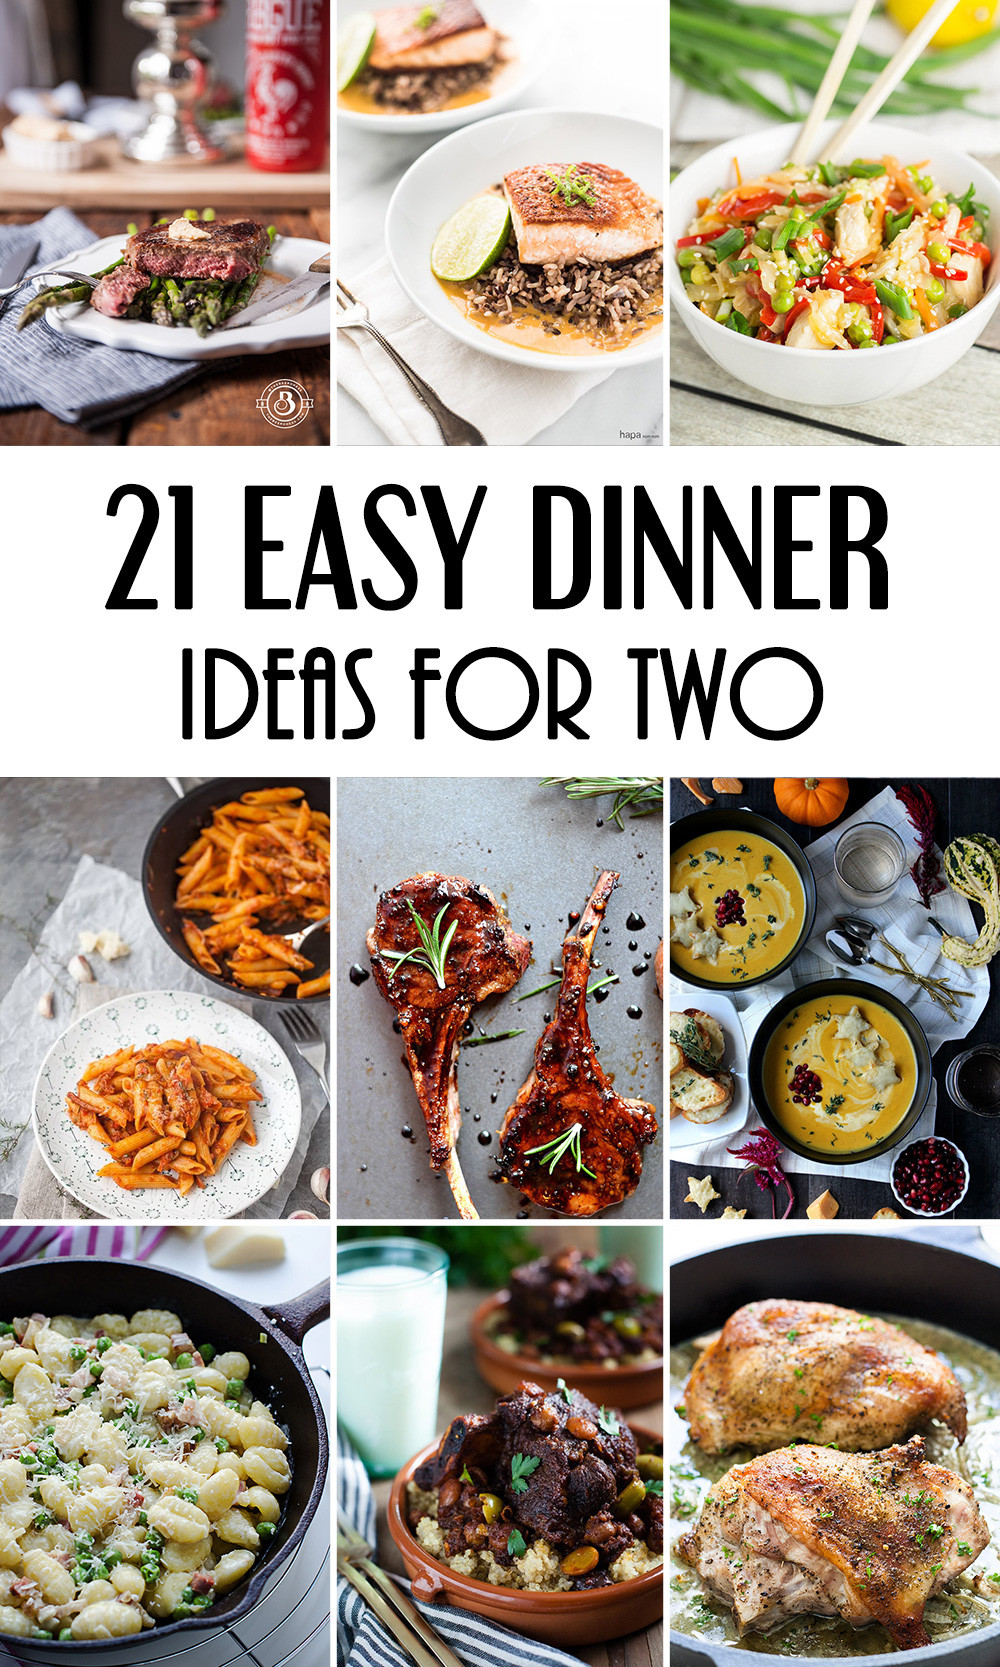 Easy Healthy Meals For Dinner
 21 Easy Dinner Ideas For Two That Will Impress Your Loved e